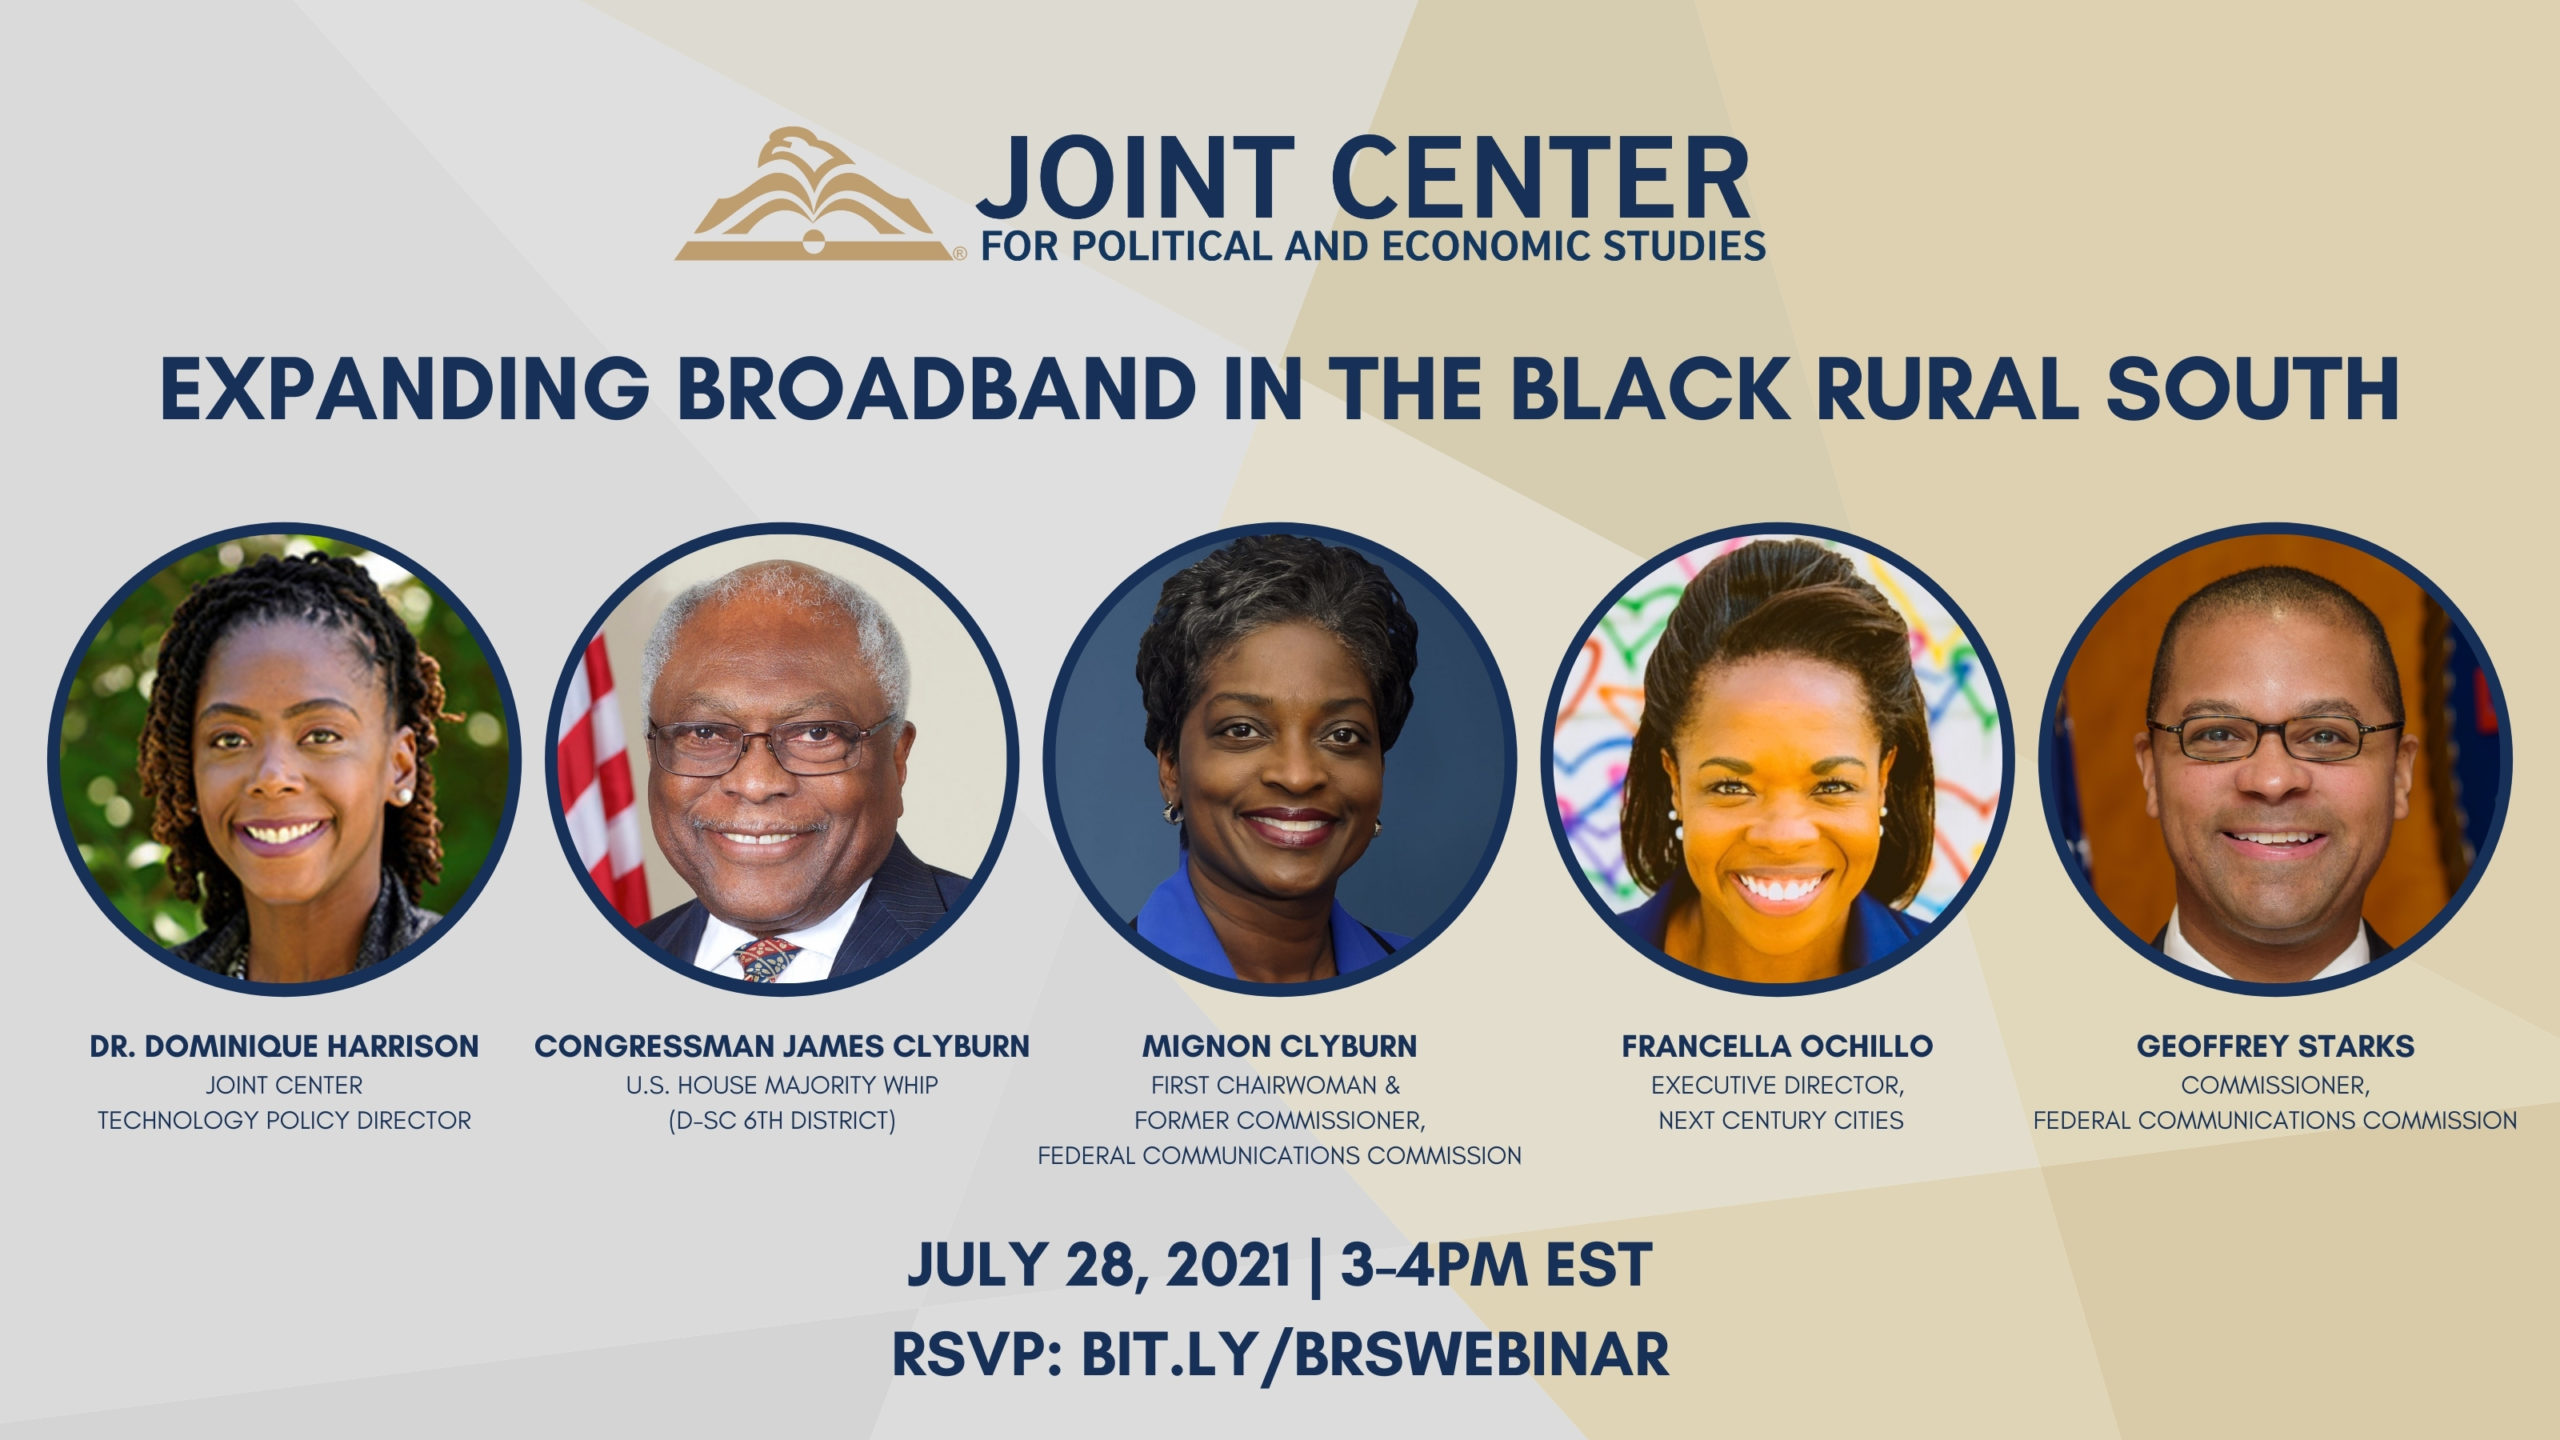 Expanding Broadband in the Black Rural South event flyer